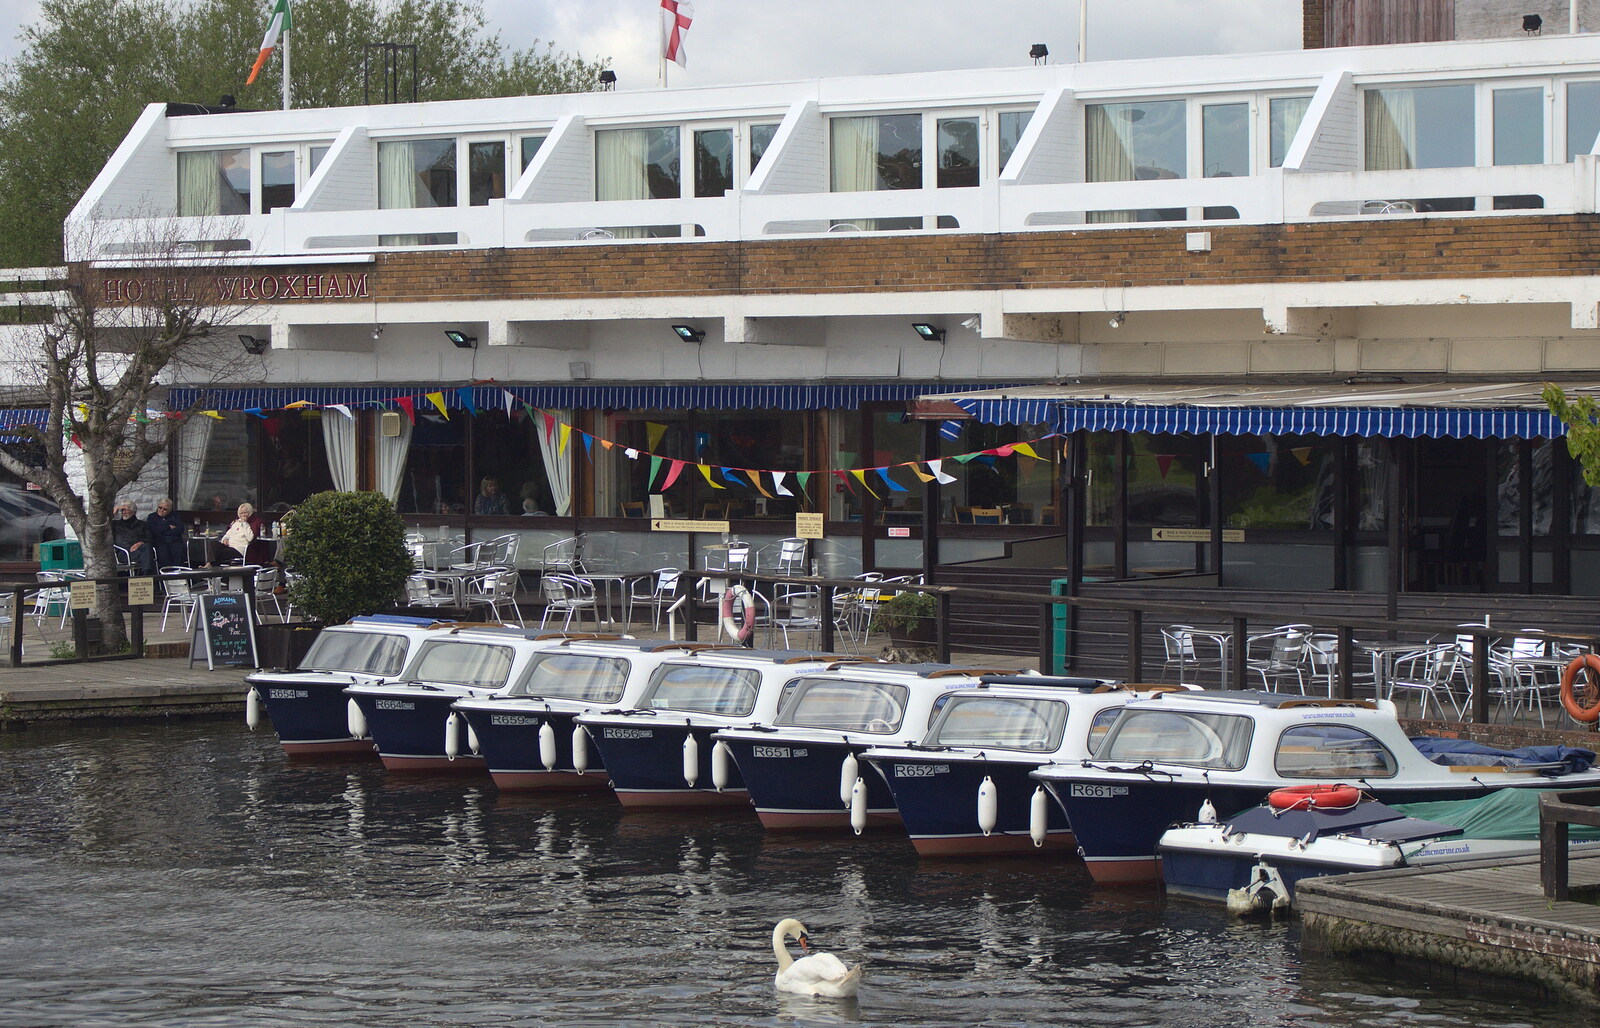 A line up of boats, and the 70s Hotel Wroxham from A Trip on the Norfolk Broads, Wroxham, Norfolk - 25th May 2013